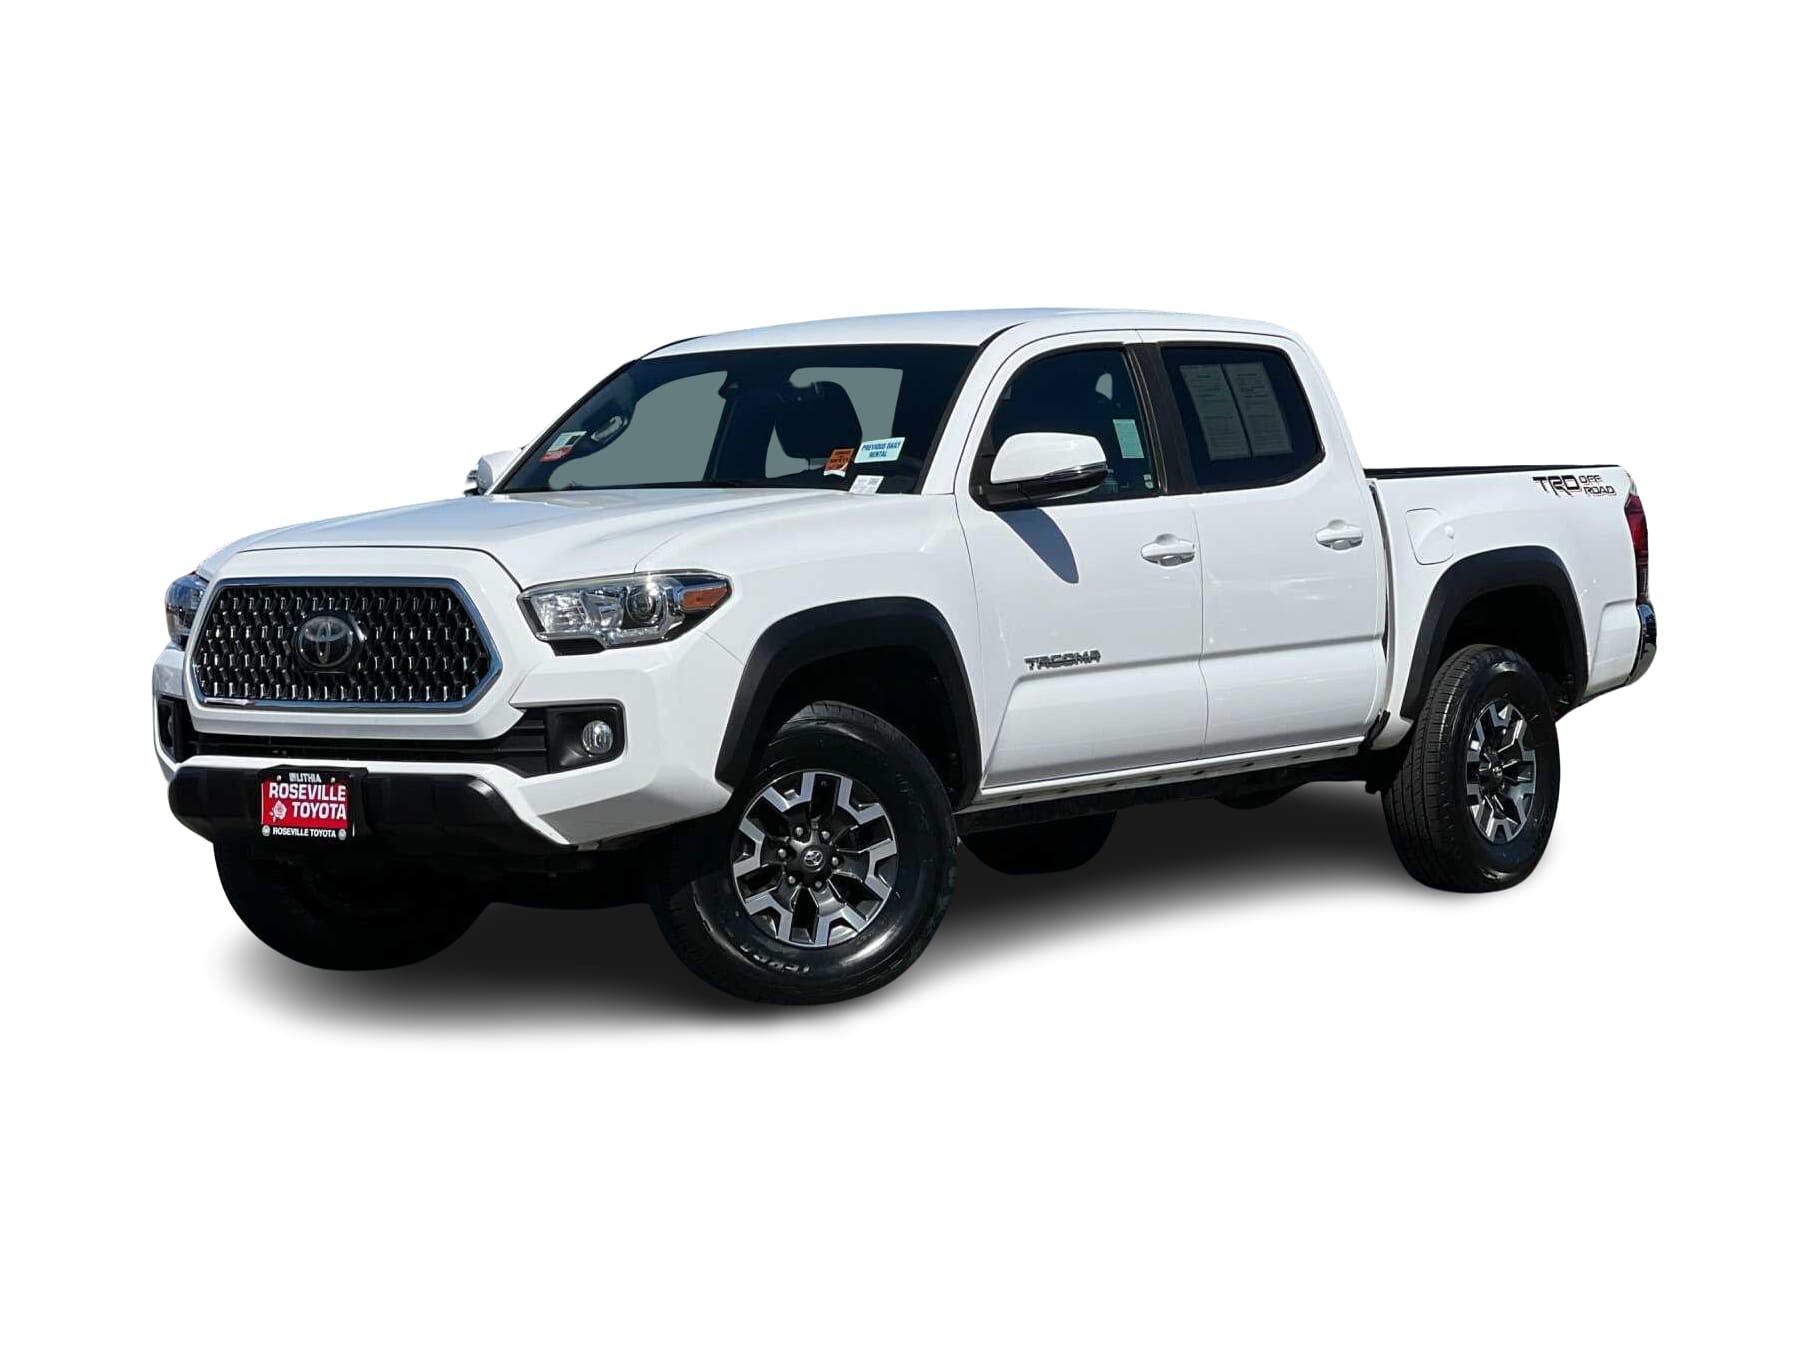 2019 Toyota Tacoma TRD Off-Road -
                Roseville, CA